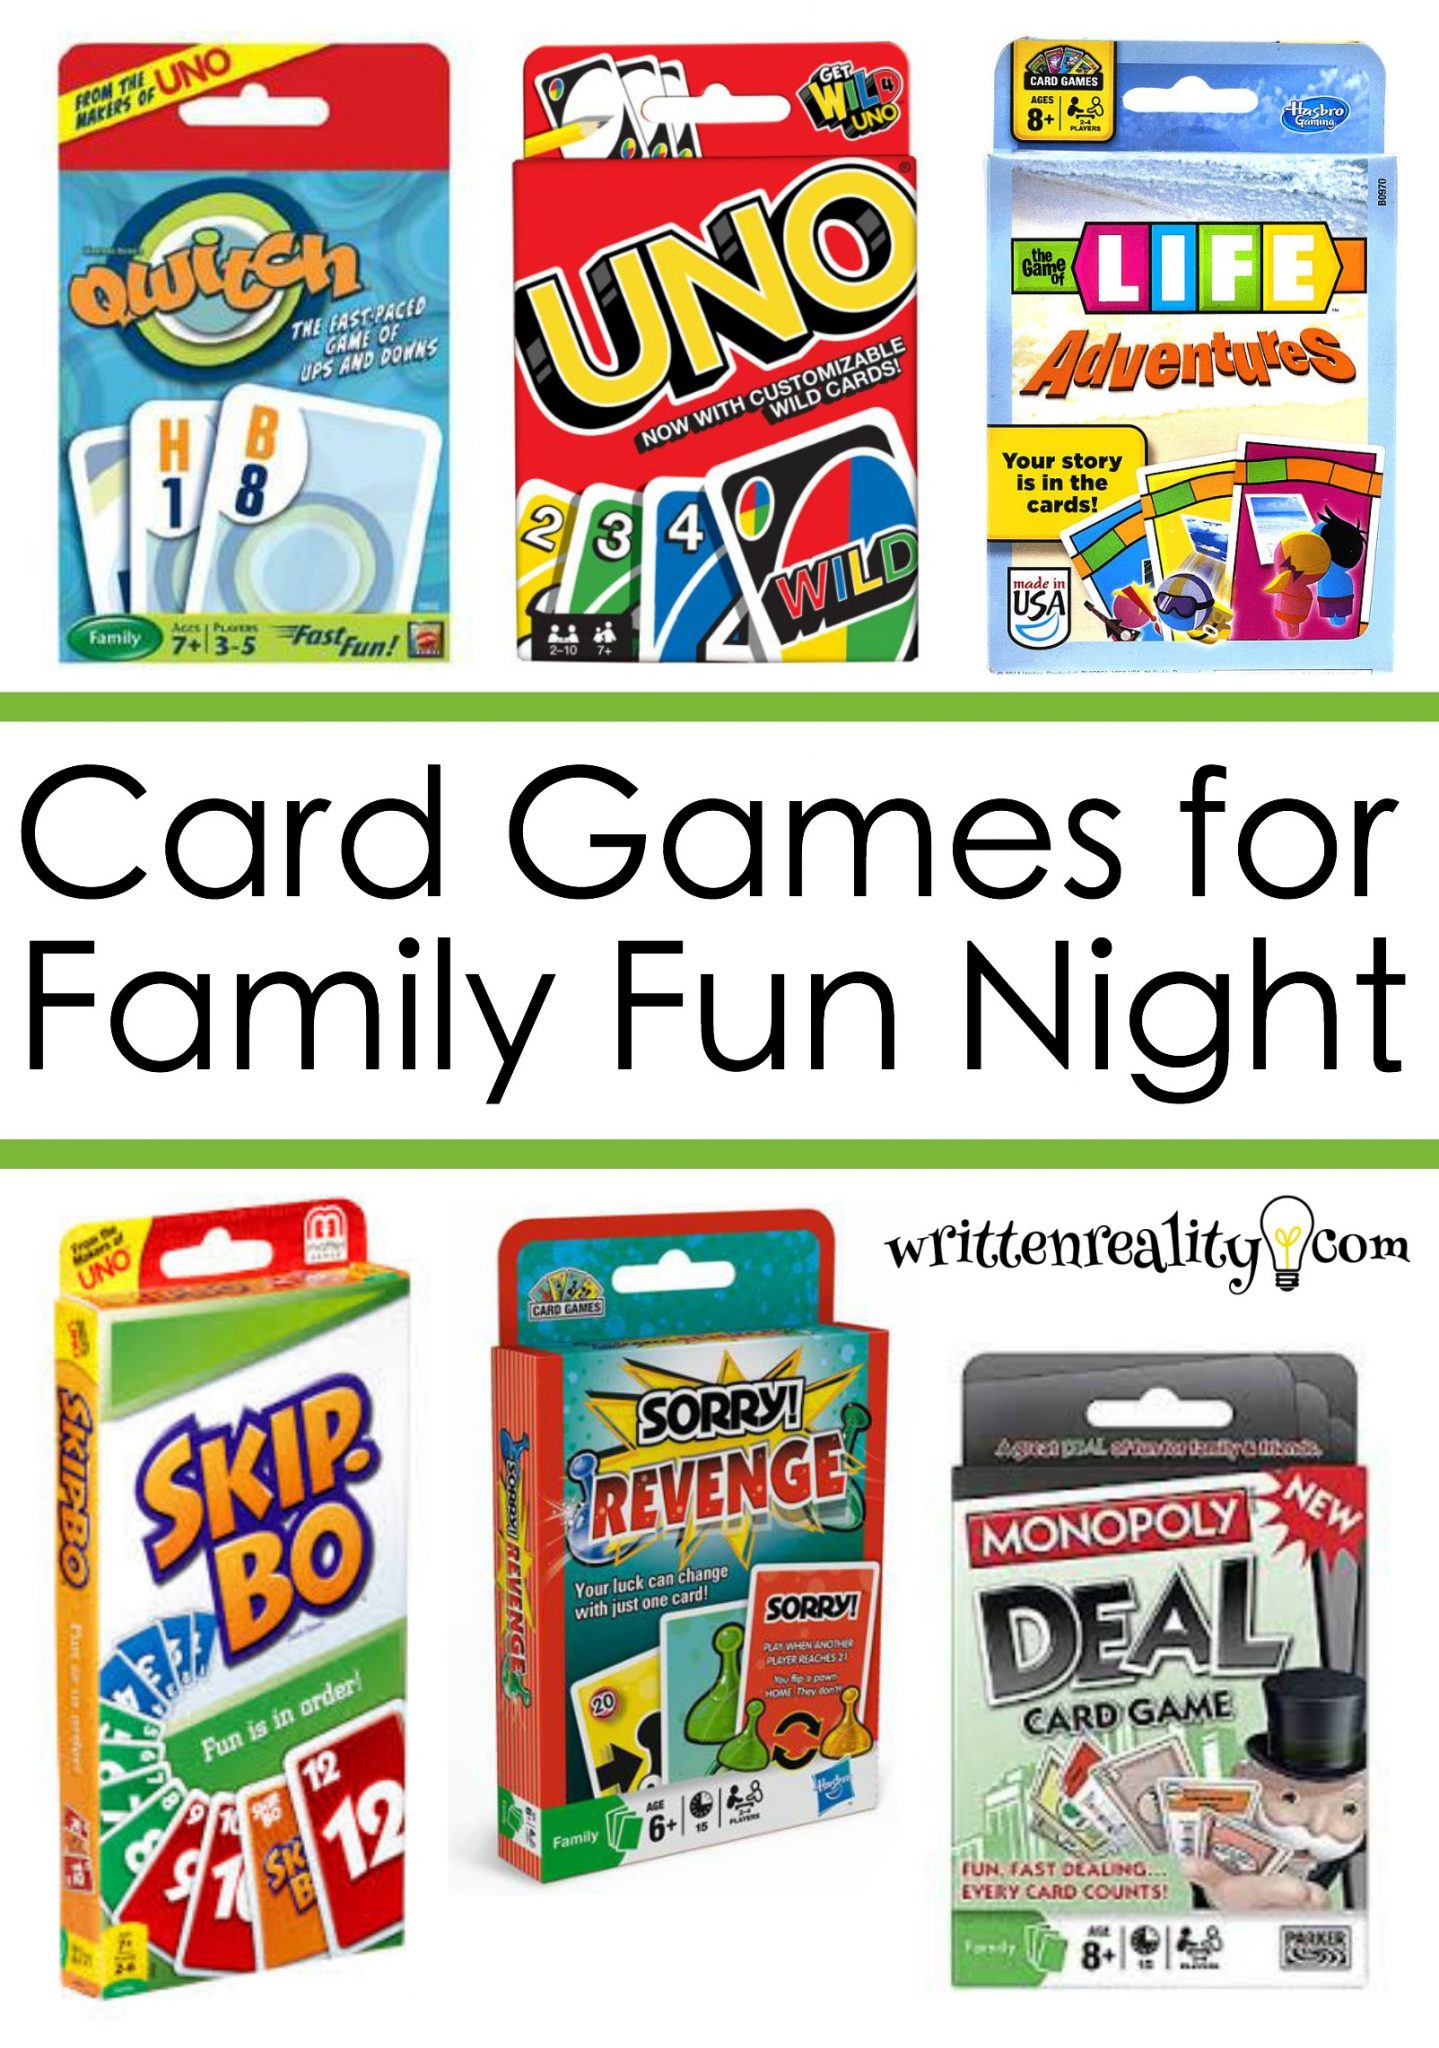 7-best-card-games-kids-love-to-play-for-family-fun-night-written-reality